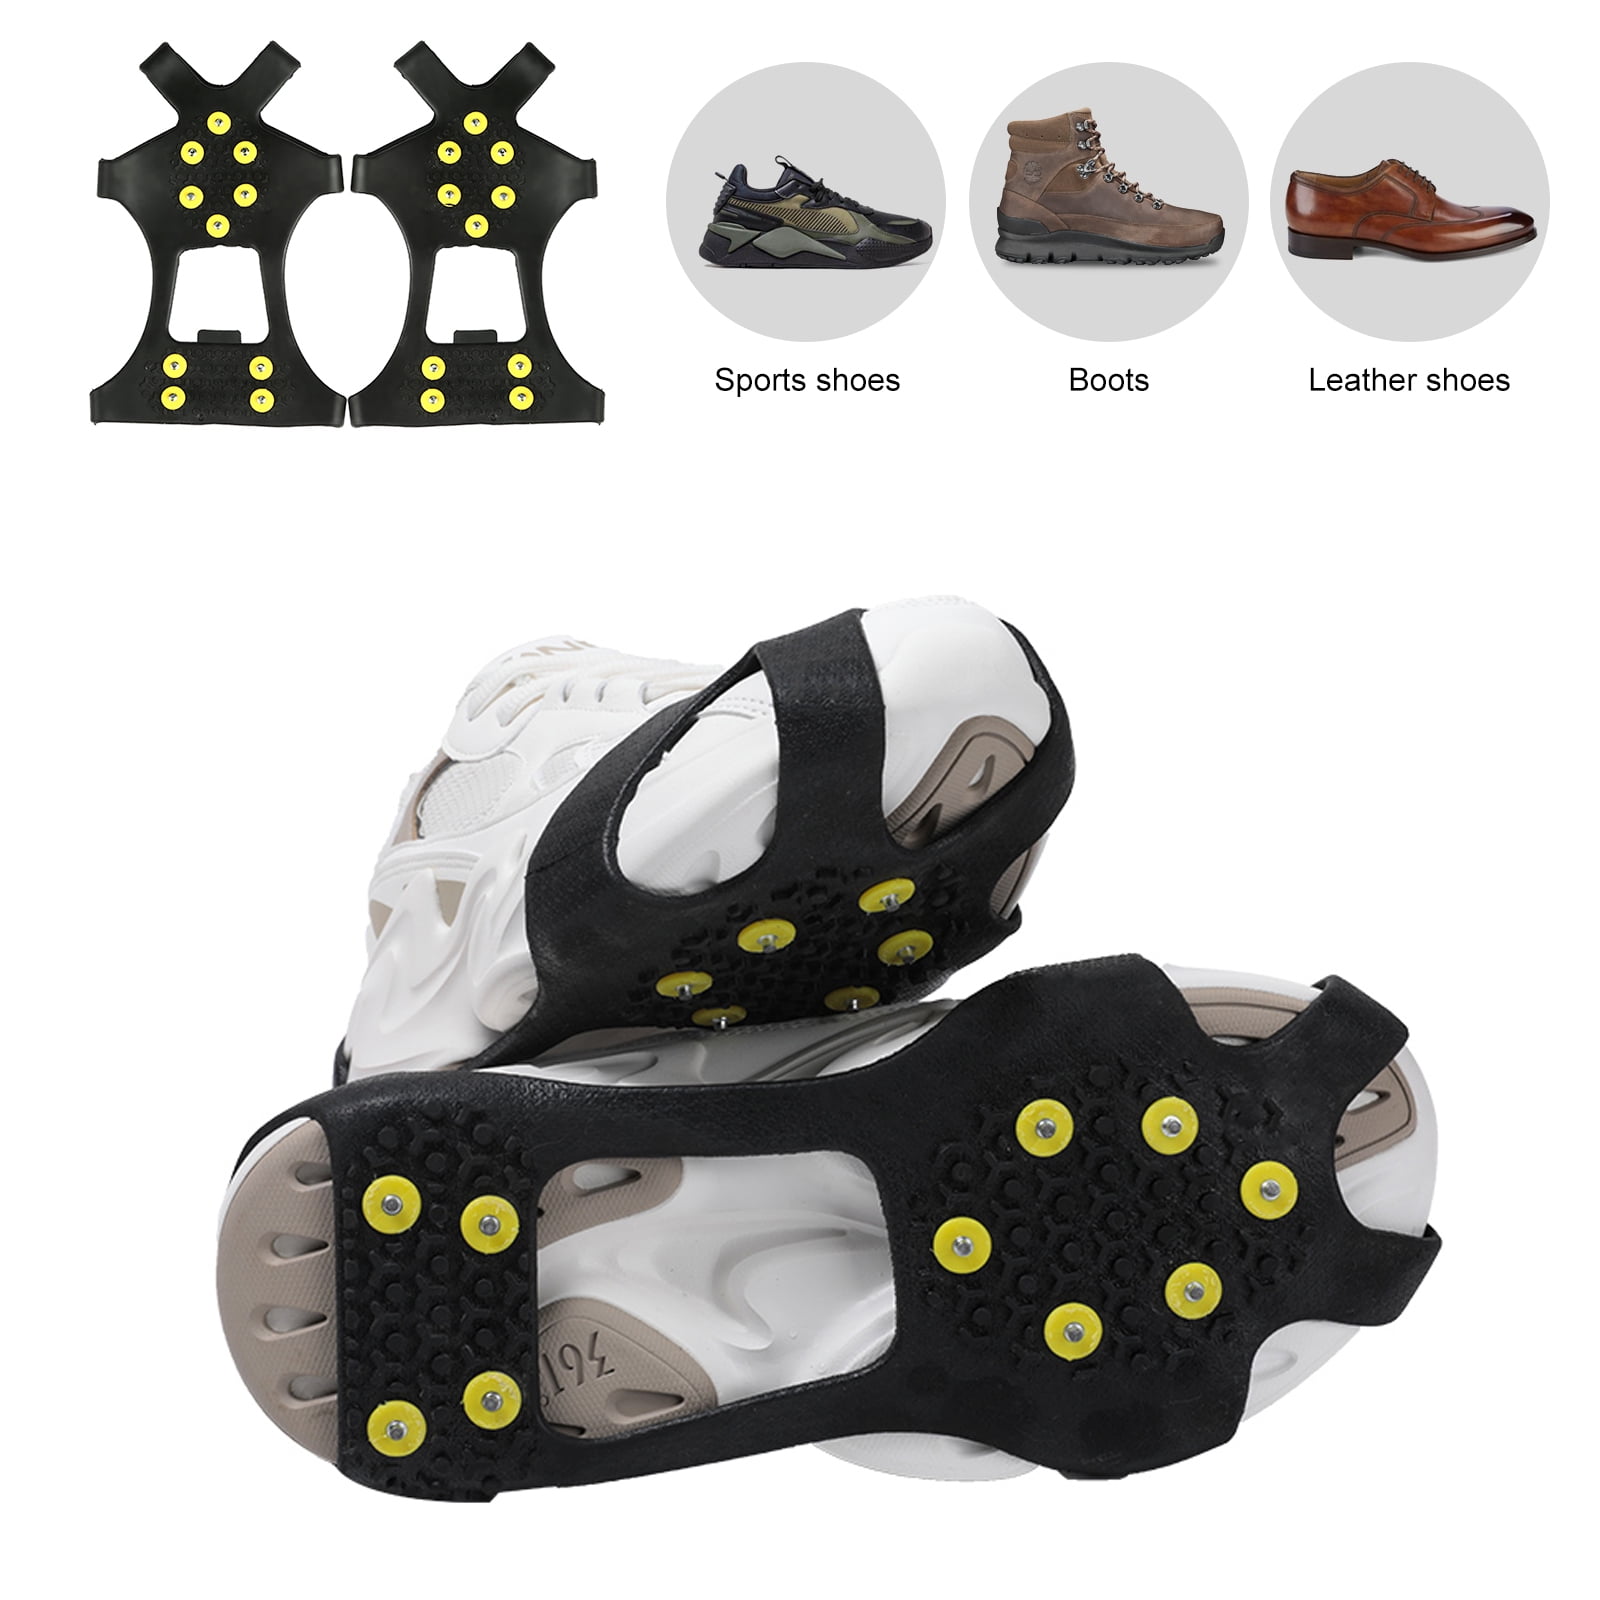 10 STUD Ice Snow Grippers Anti Slip Winter Shoes Boots Spikes Grips Crampons UK 